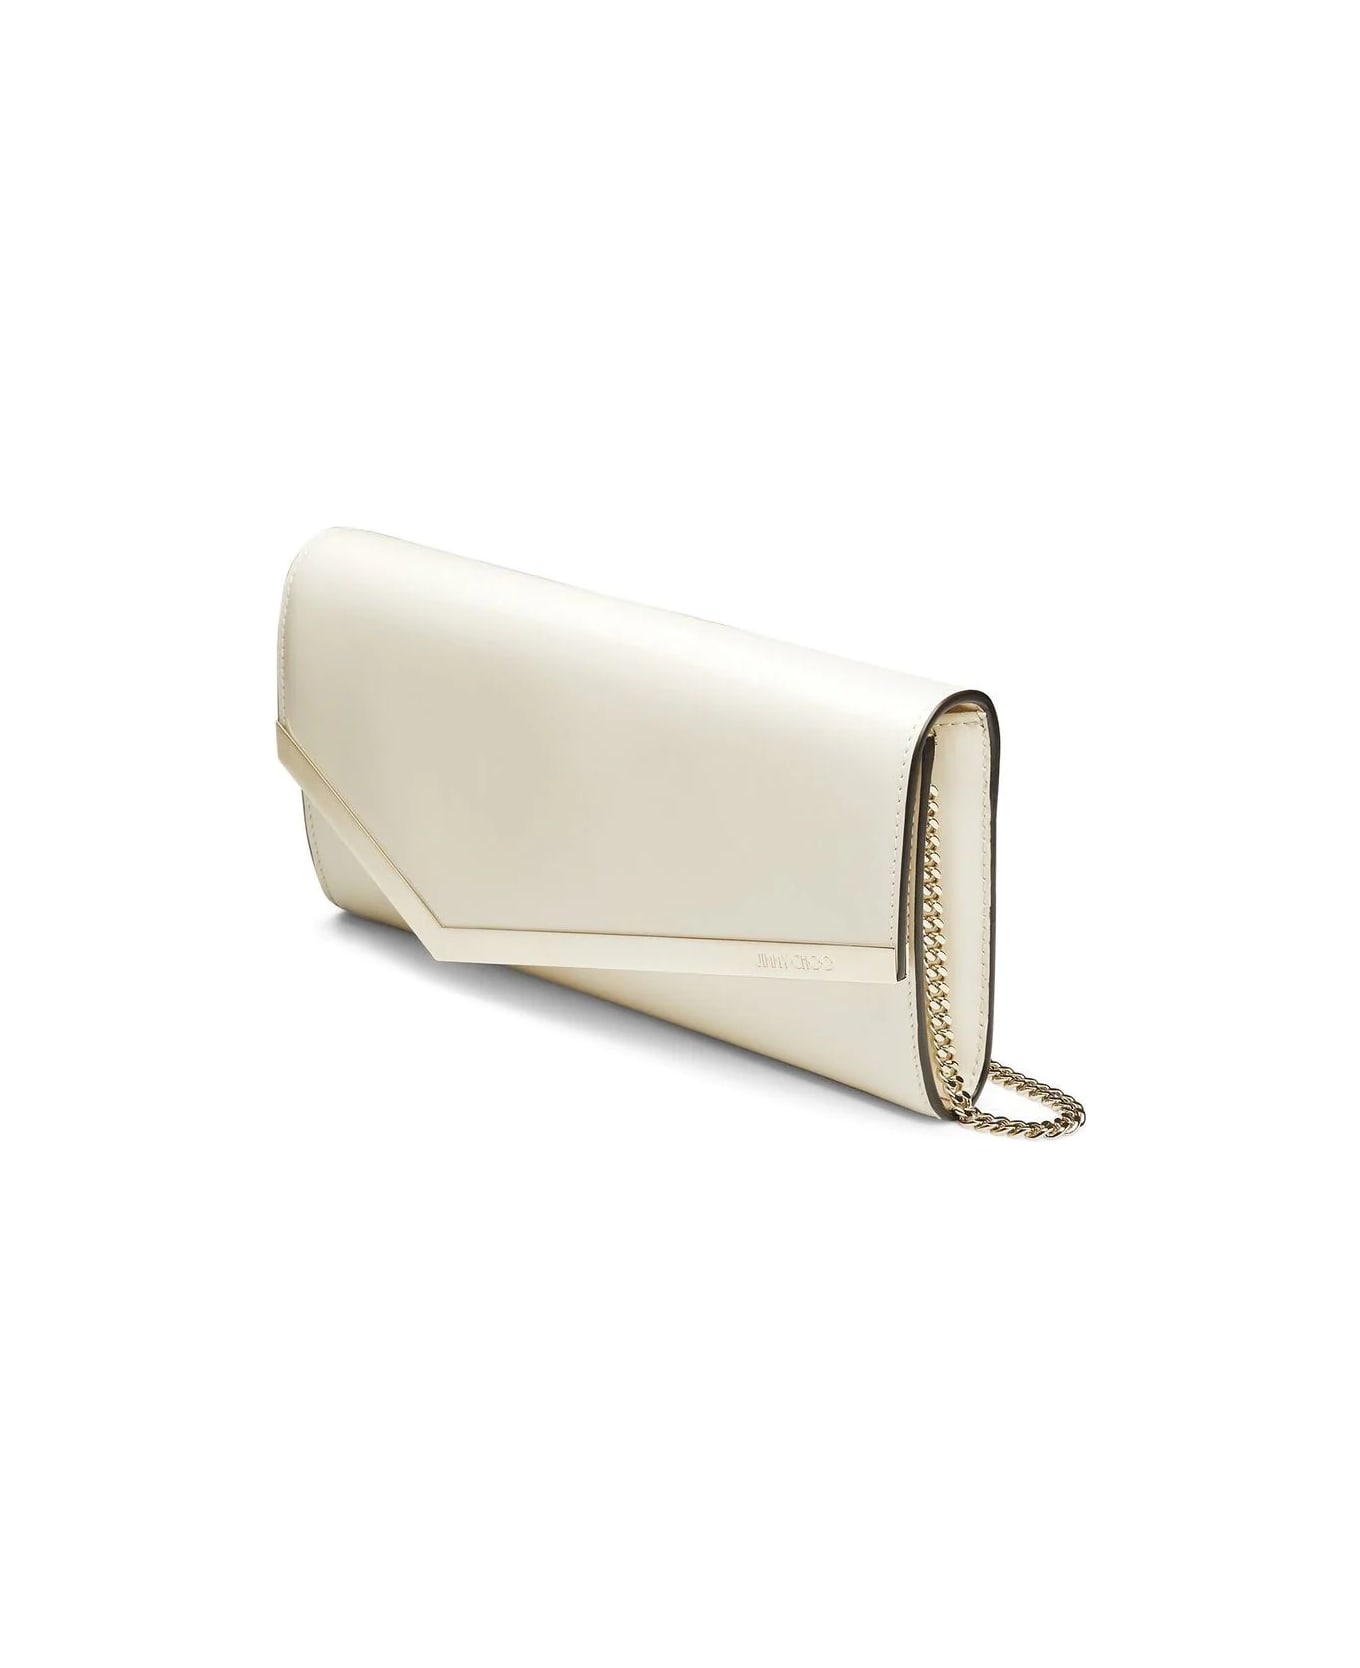 Jimmy Choo Emmie Clutch Bag In Milk Patent Leather - White